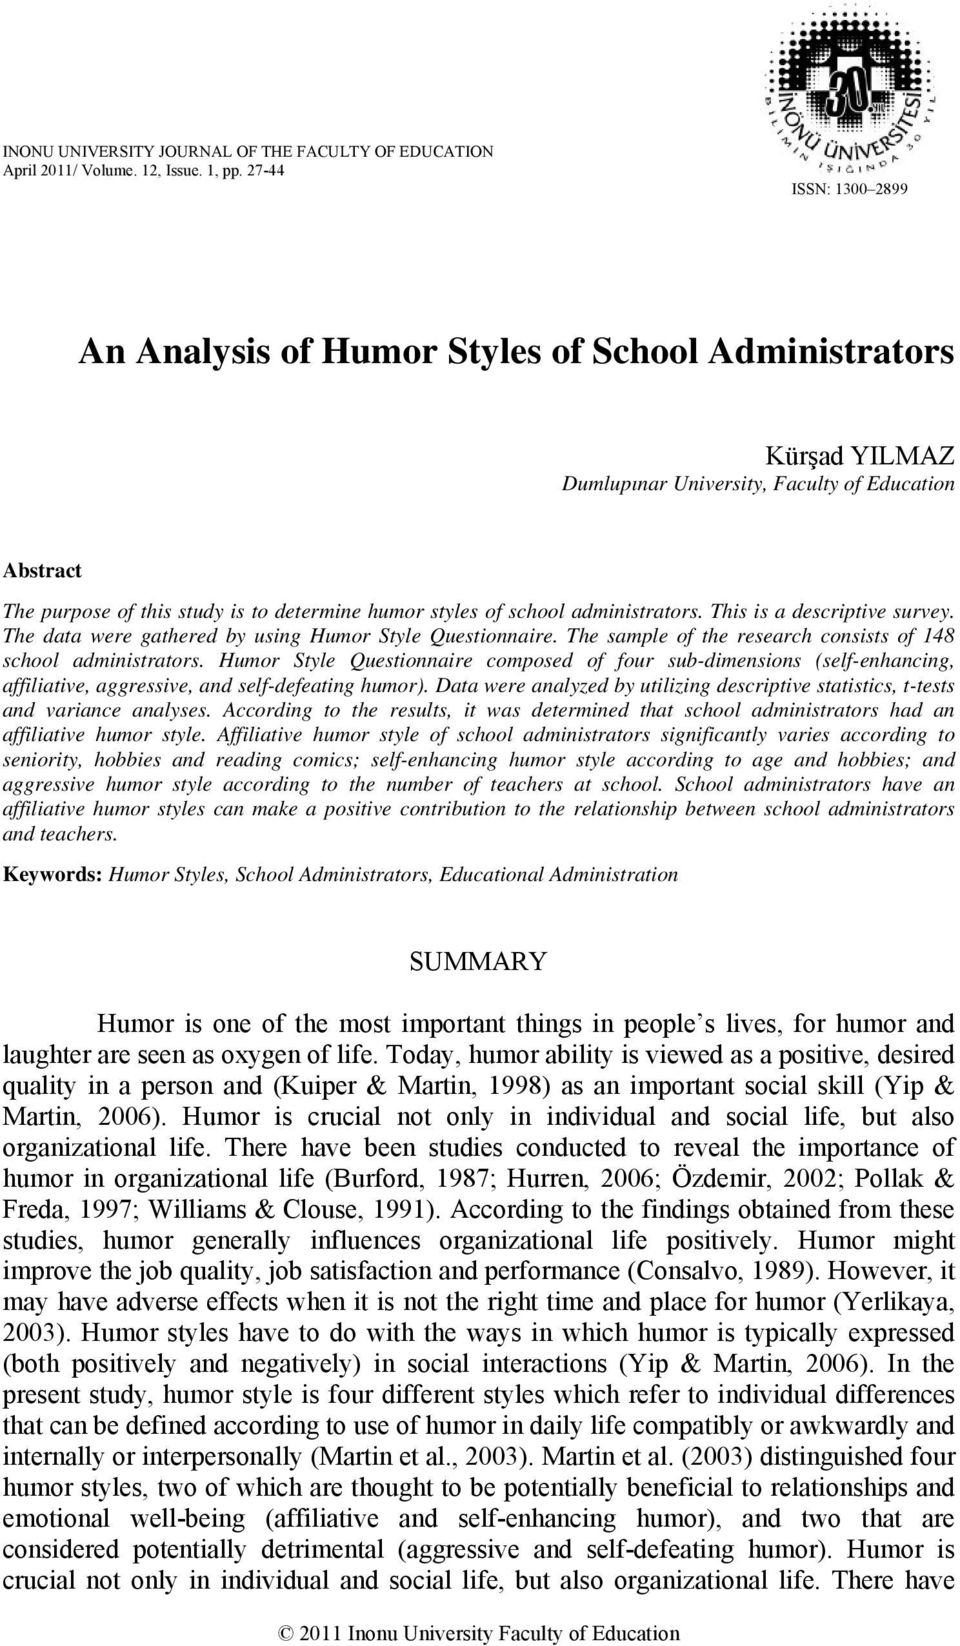 school administrators. This is a descriptive survey. The data were gathered by using Humor Style Questionnaire. The sample of the research consists of 148 school administrators.